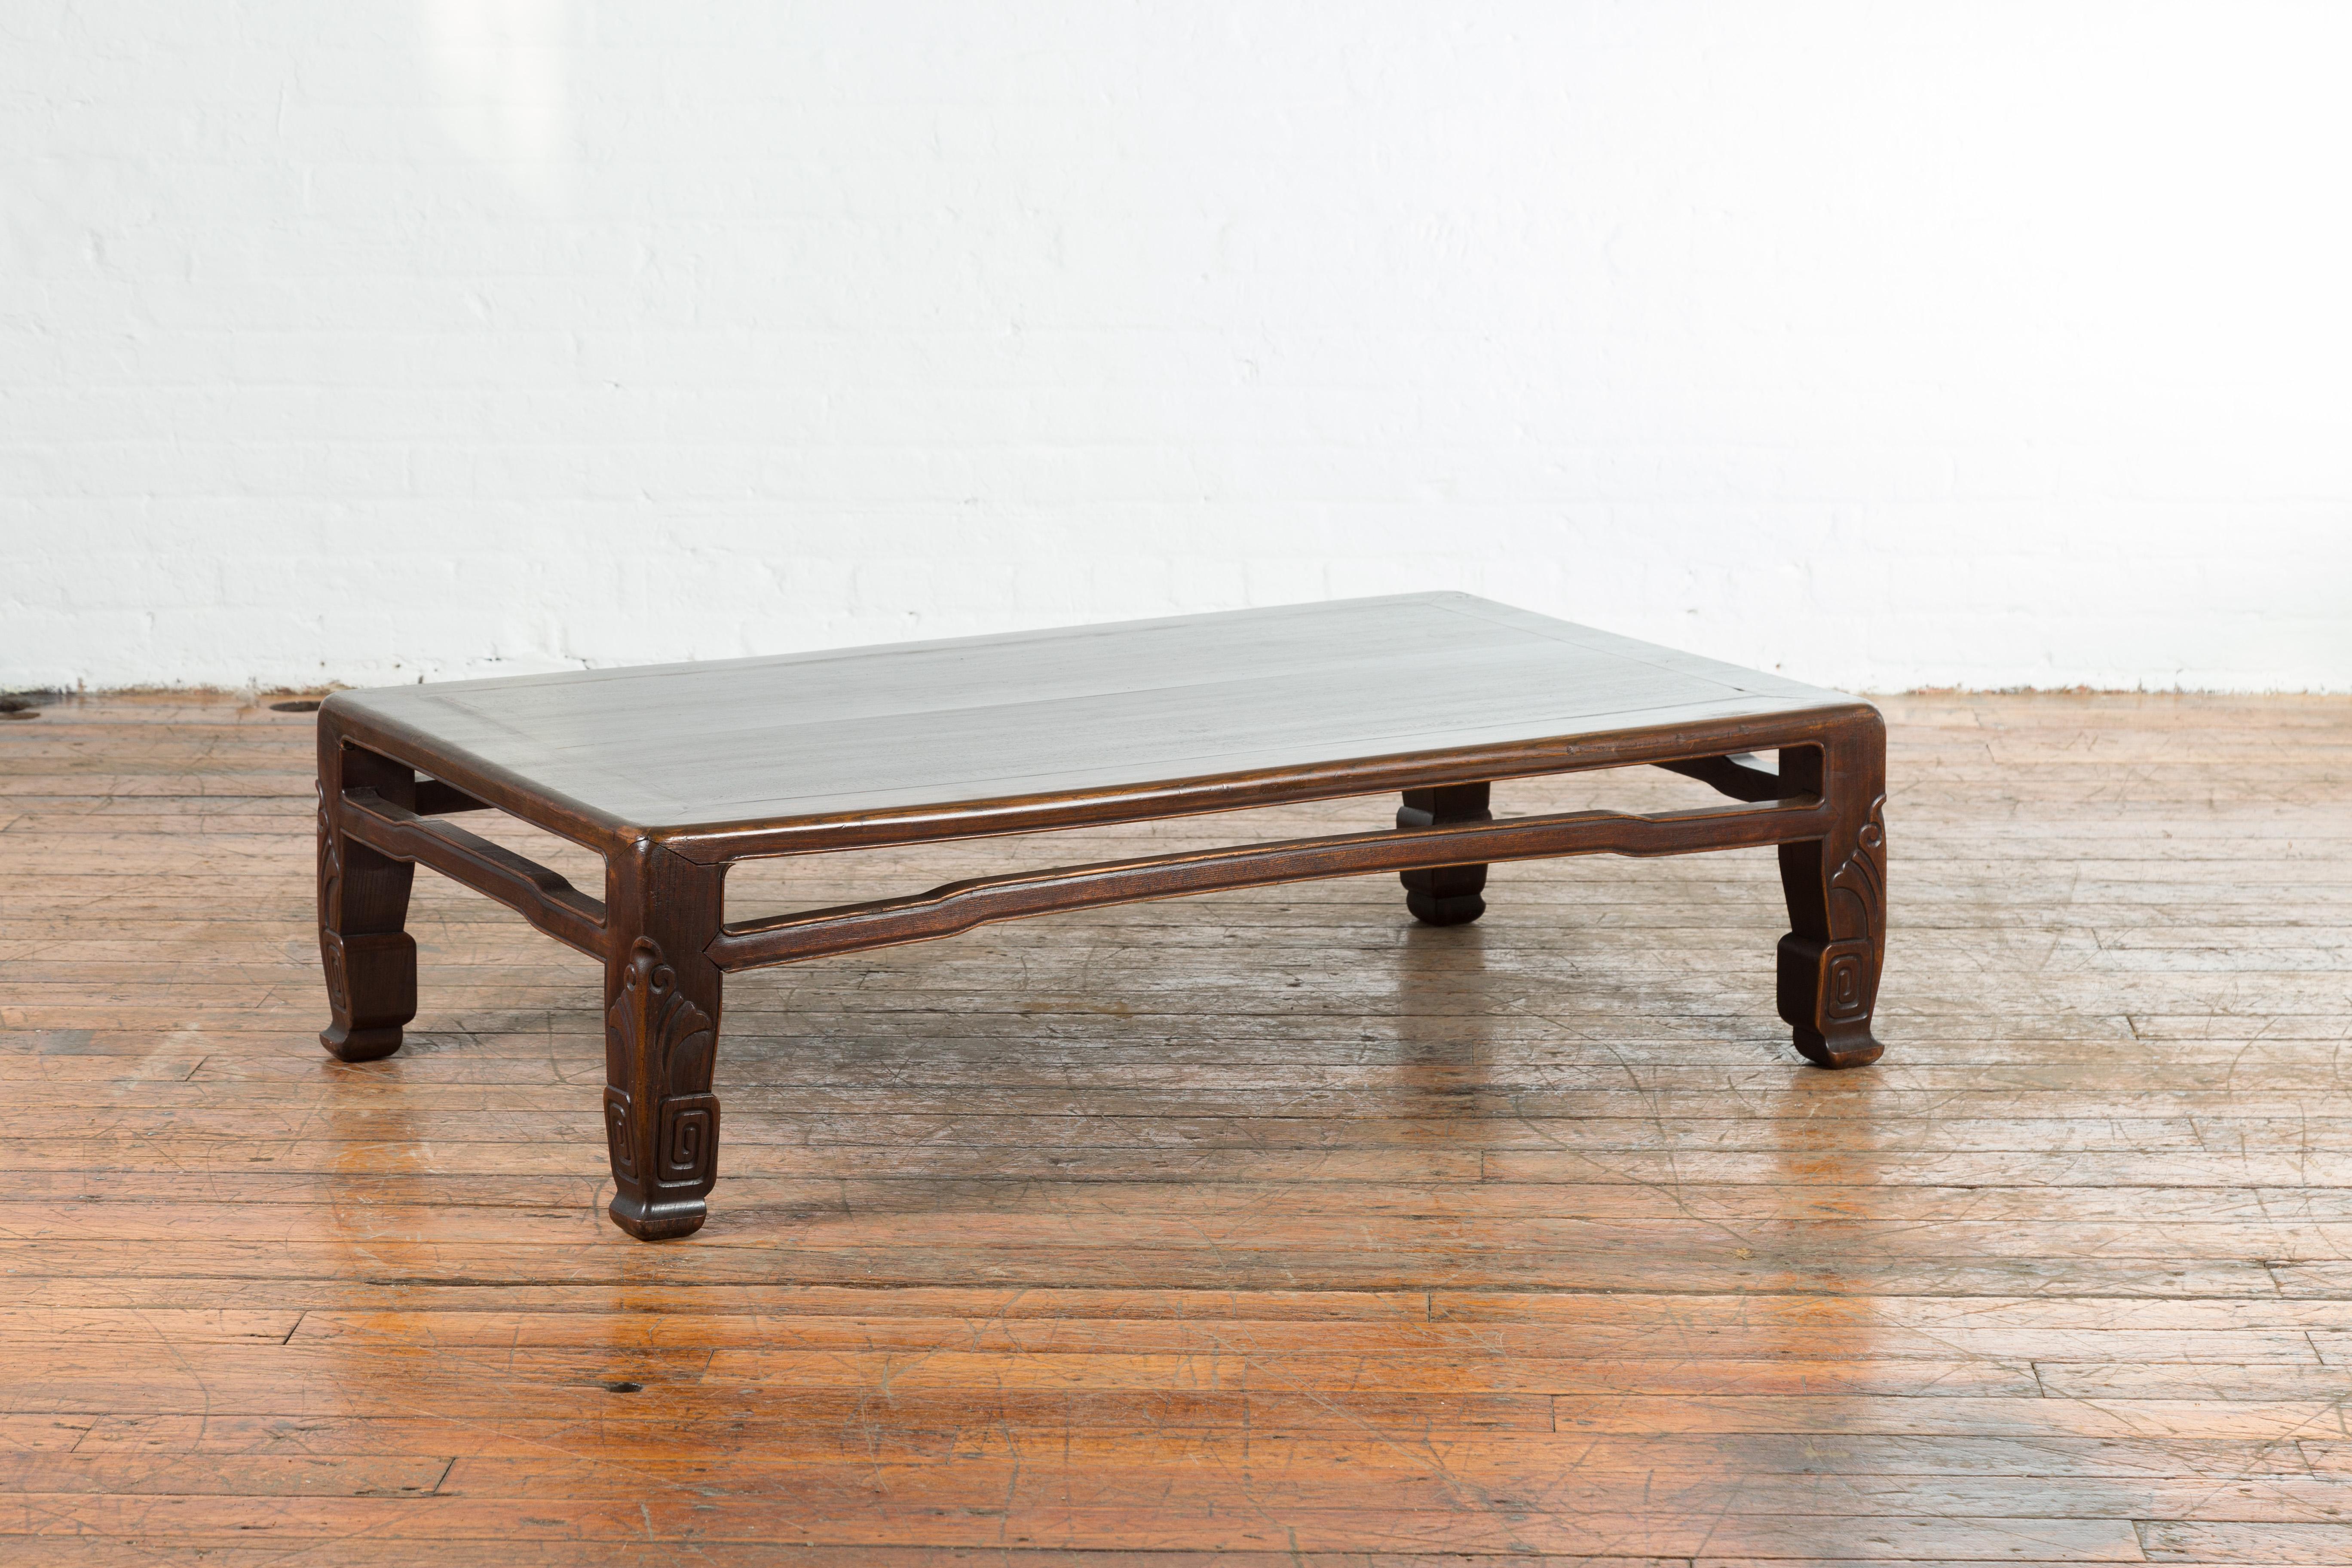 Chinese Antique Elmwood Coffee Table with Scrolling Feet and Humpback Stretchers In Good Condition For Sale In Yonkers, NY